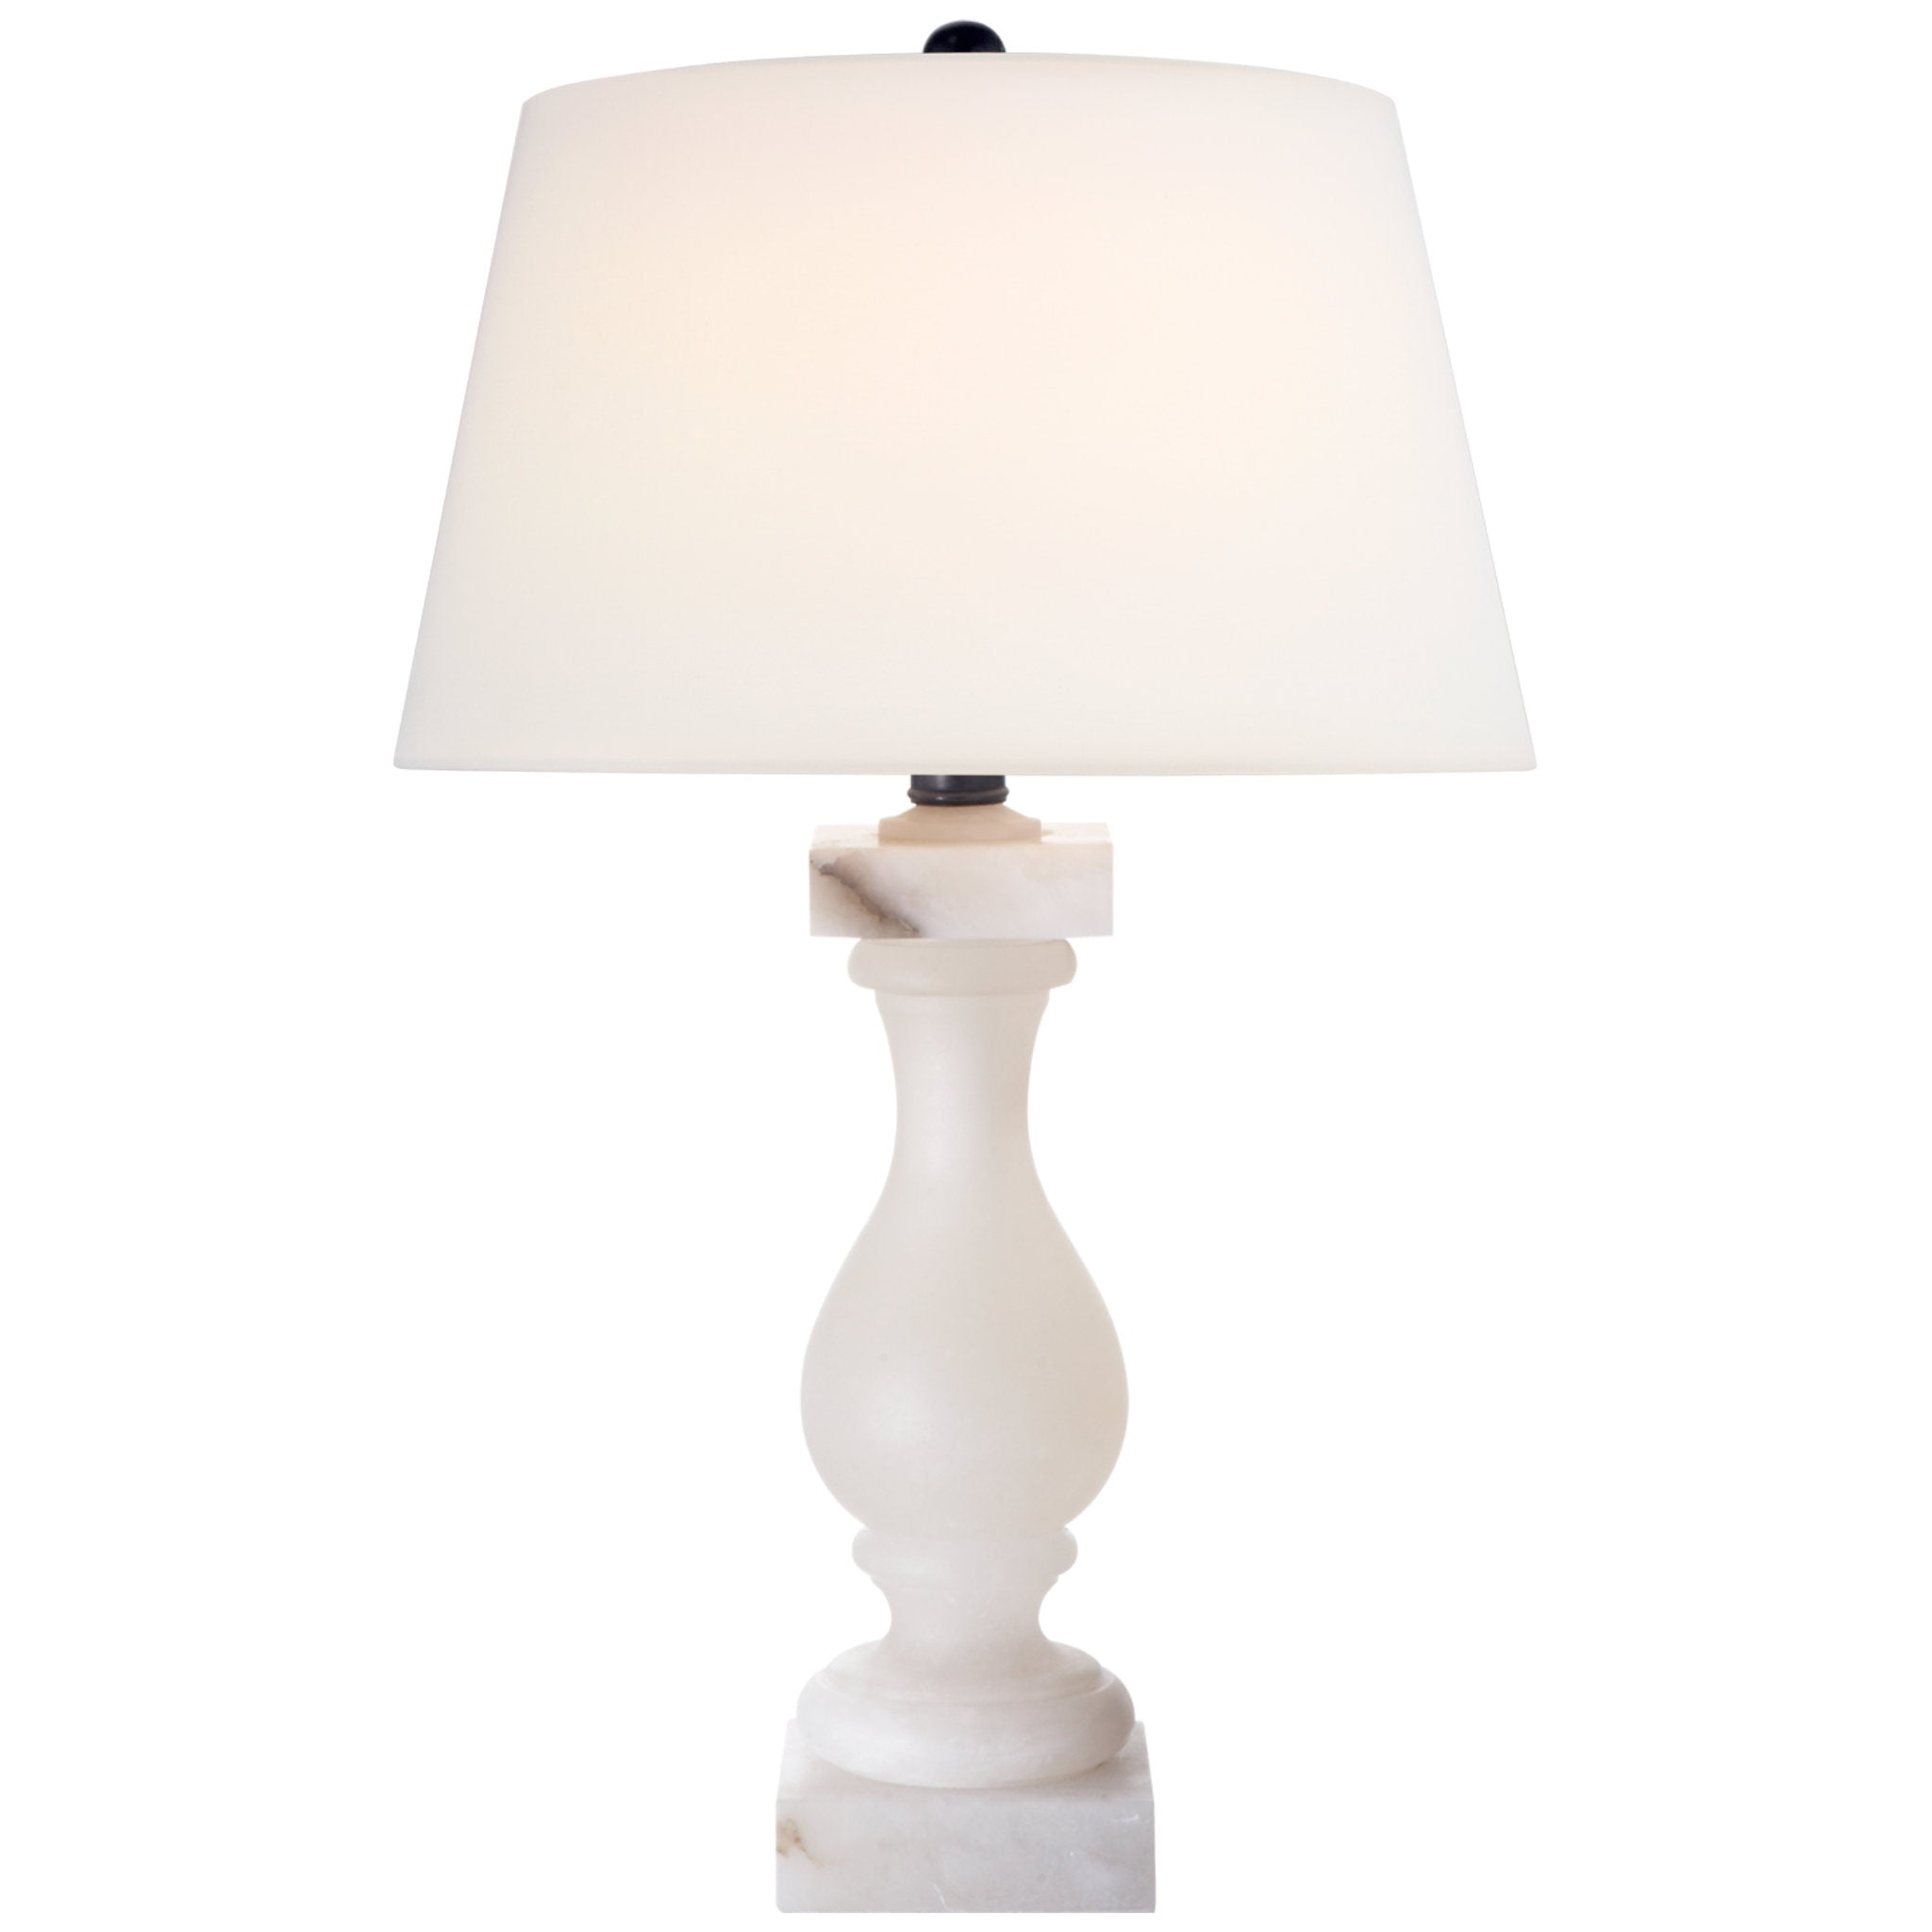 Chapman & Myers Balustrade Table Lamp in Alabaster with Linen Shade